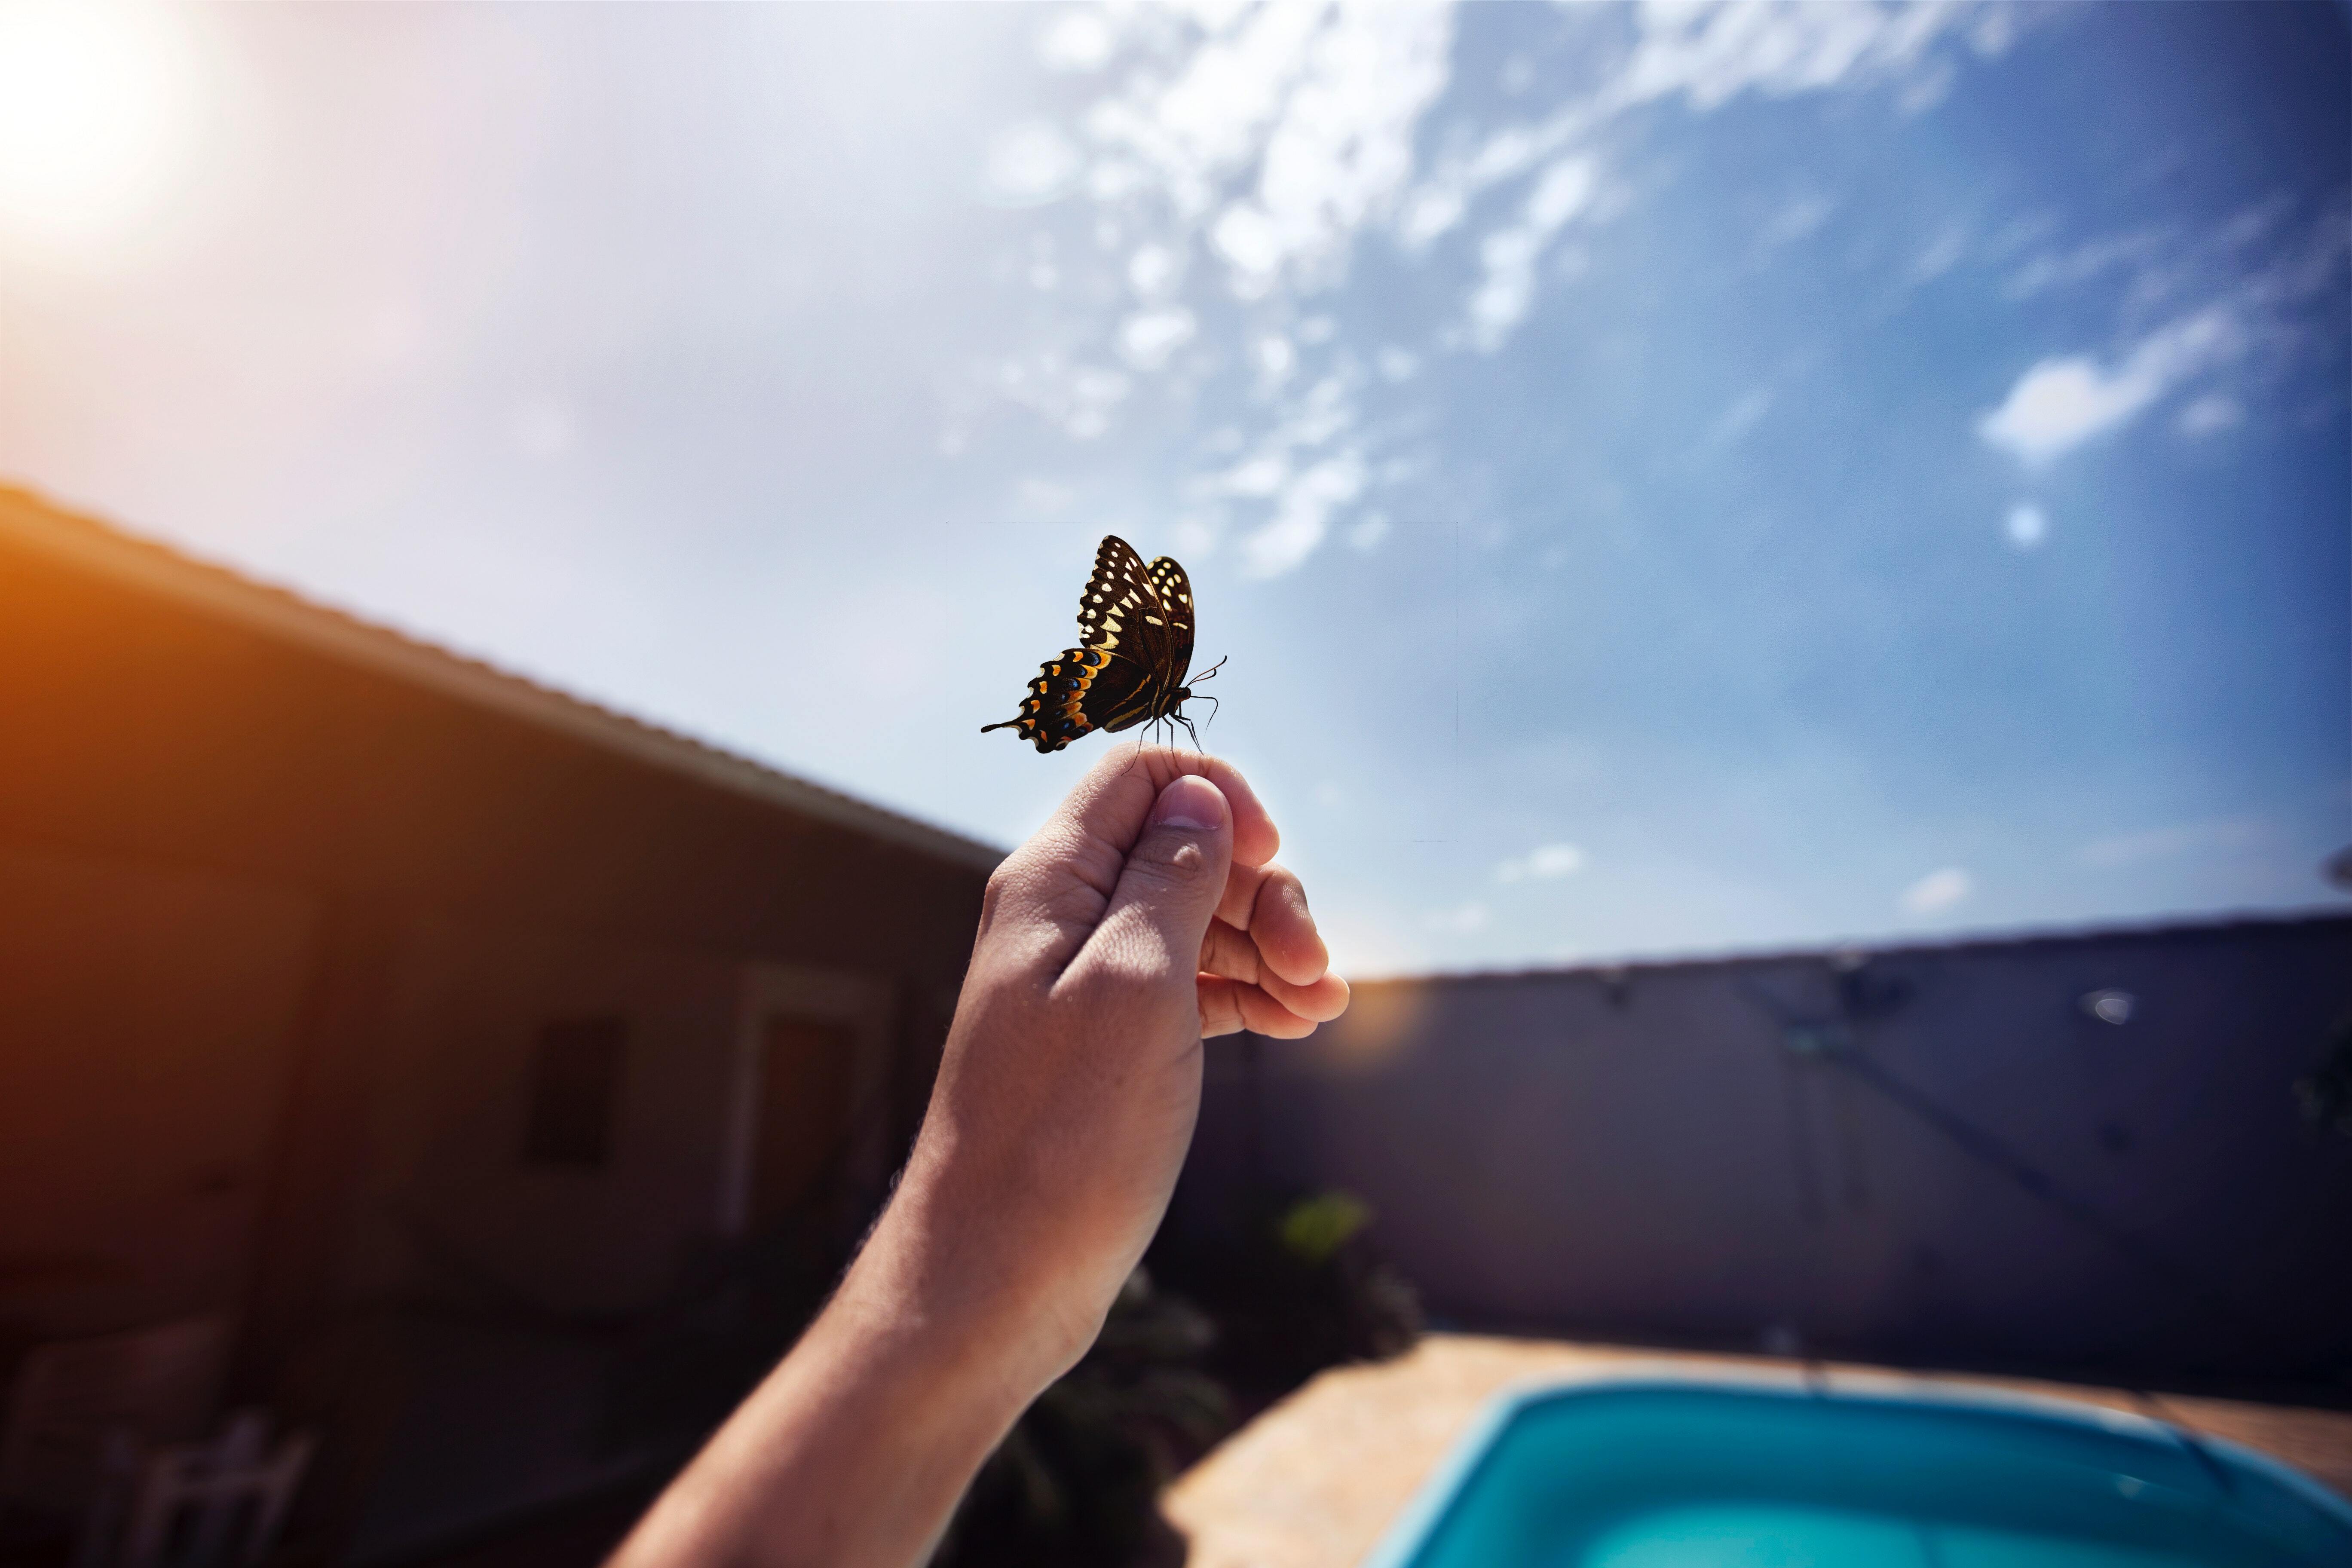 Releasing butterflies or doves is an eco-friendly alternative to farewell a loved one during a memorial service.